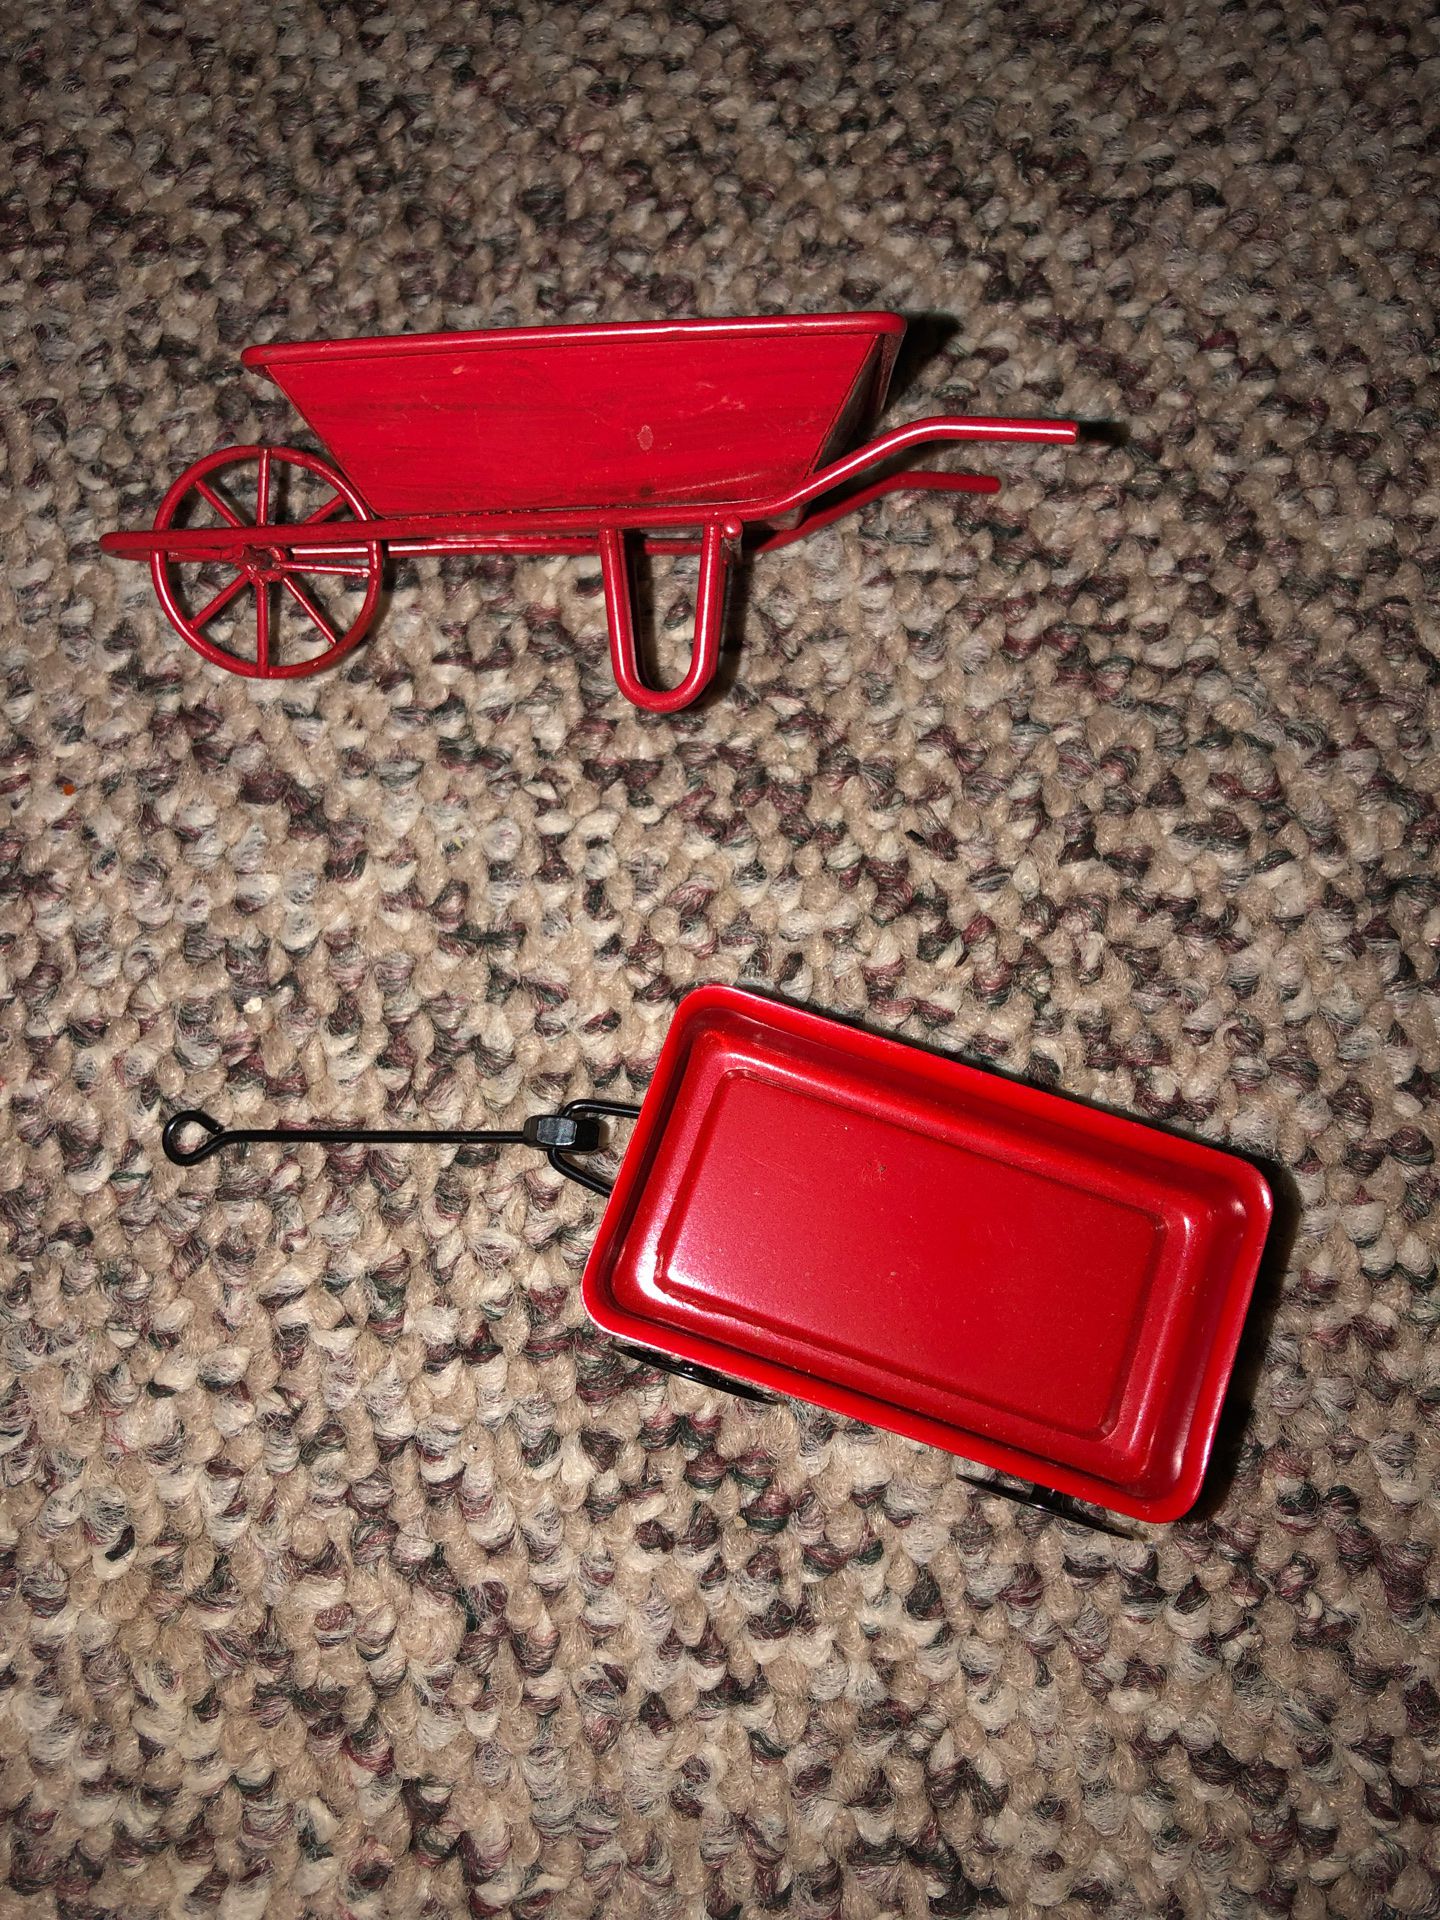 Red Wagon and Red WheelBarrel figurines or Doll Accessories